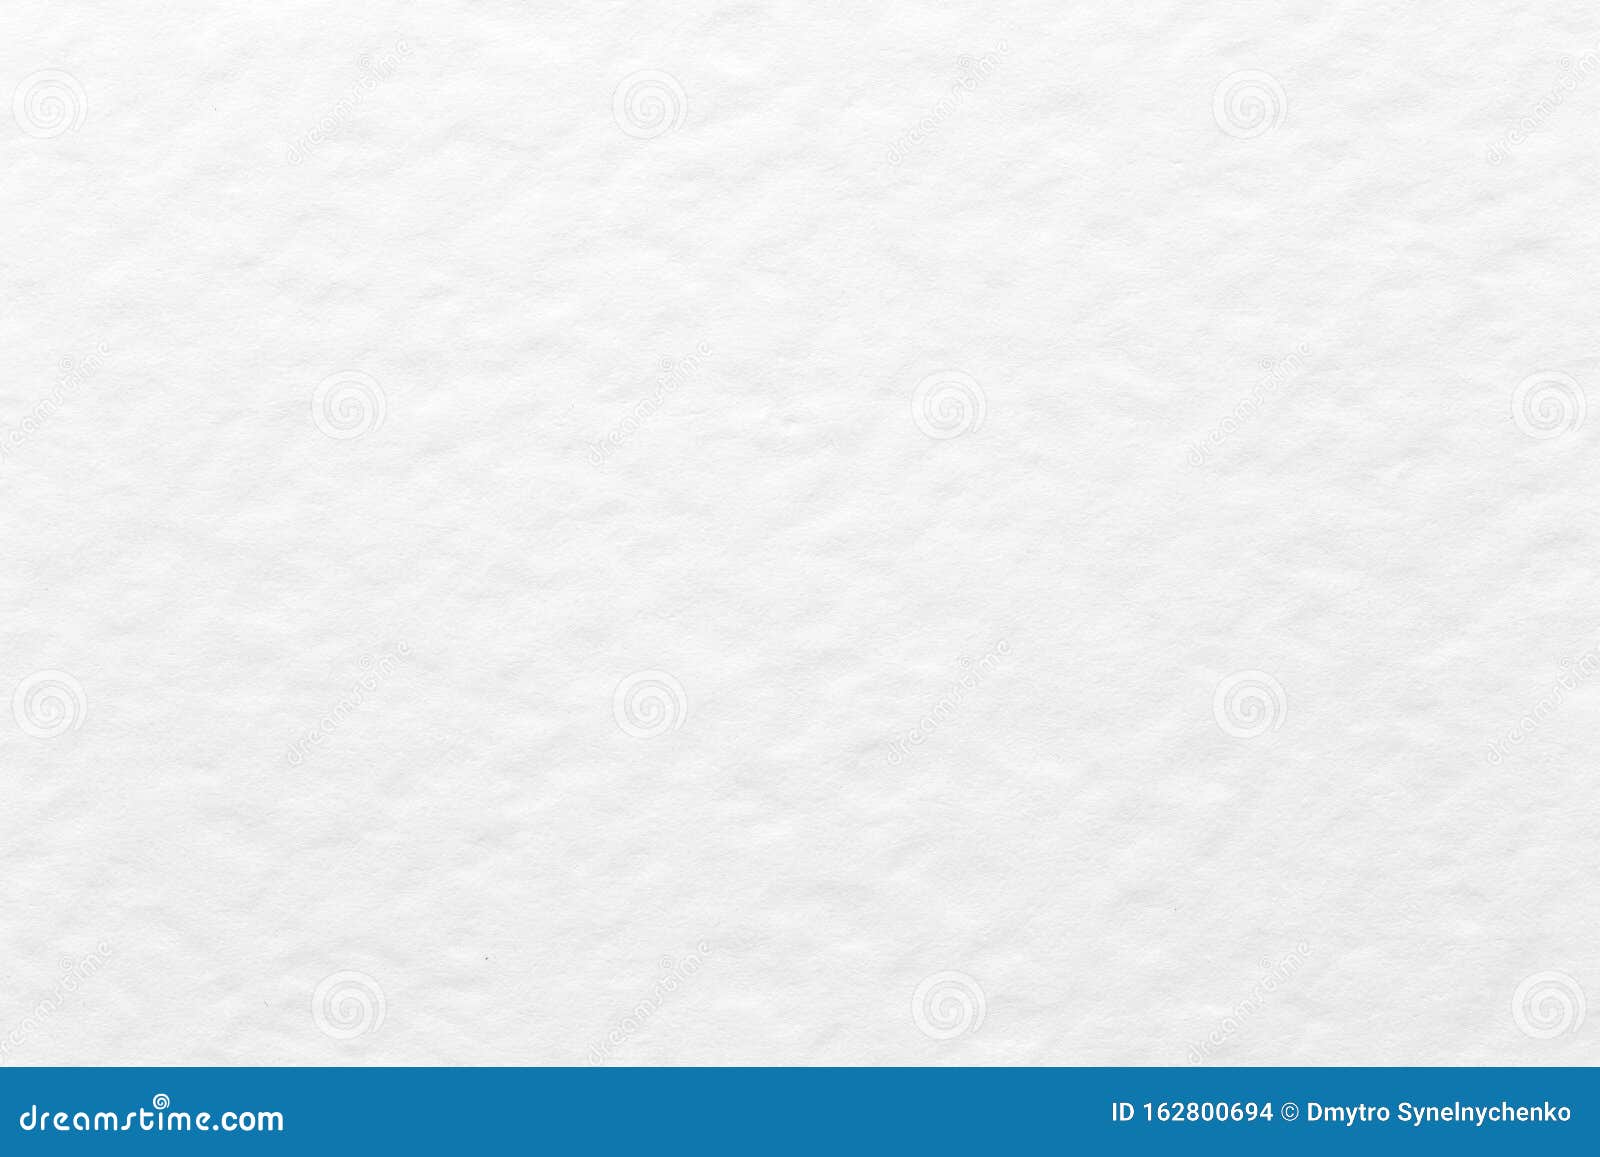 top view of white watercolor paper texture background.